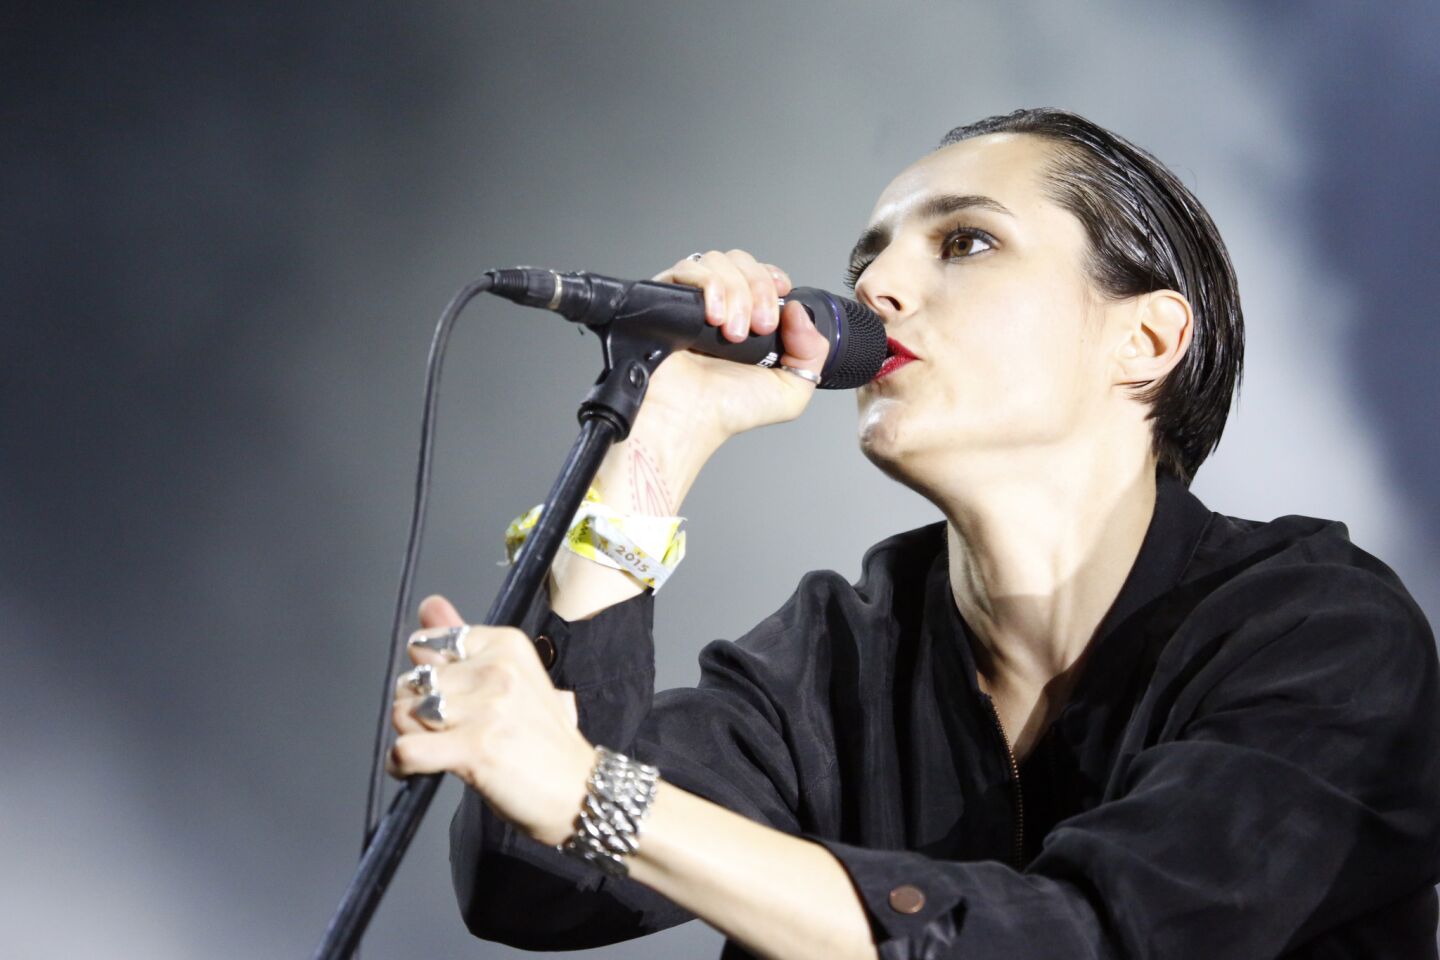 Jehnny Beth performs with Savages at FYF Fest on Aug. 22, 2015.